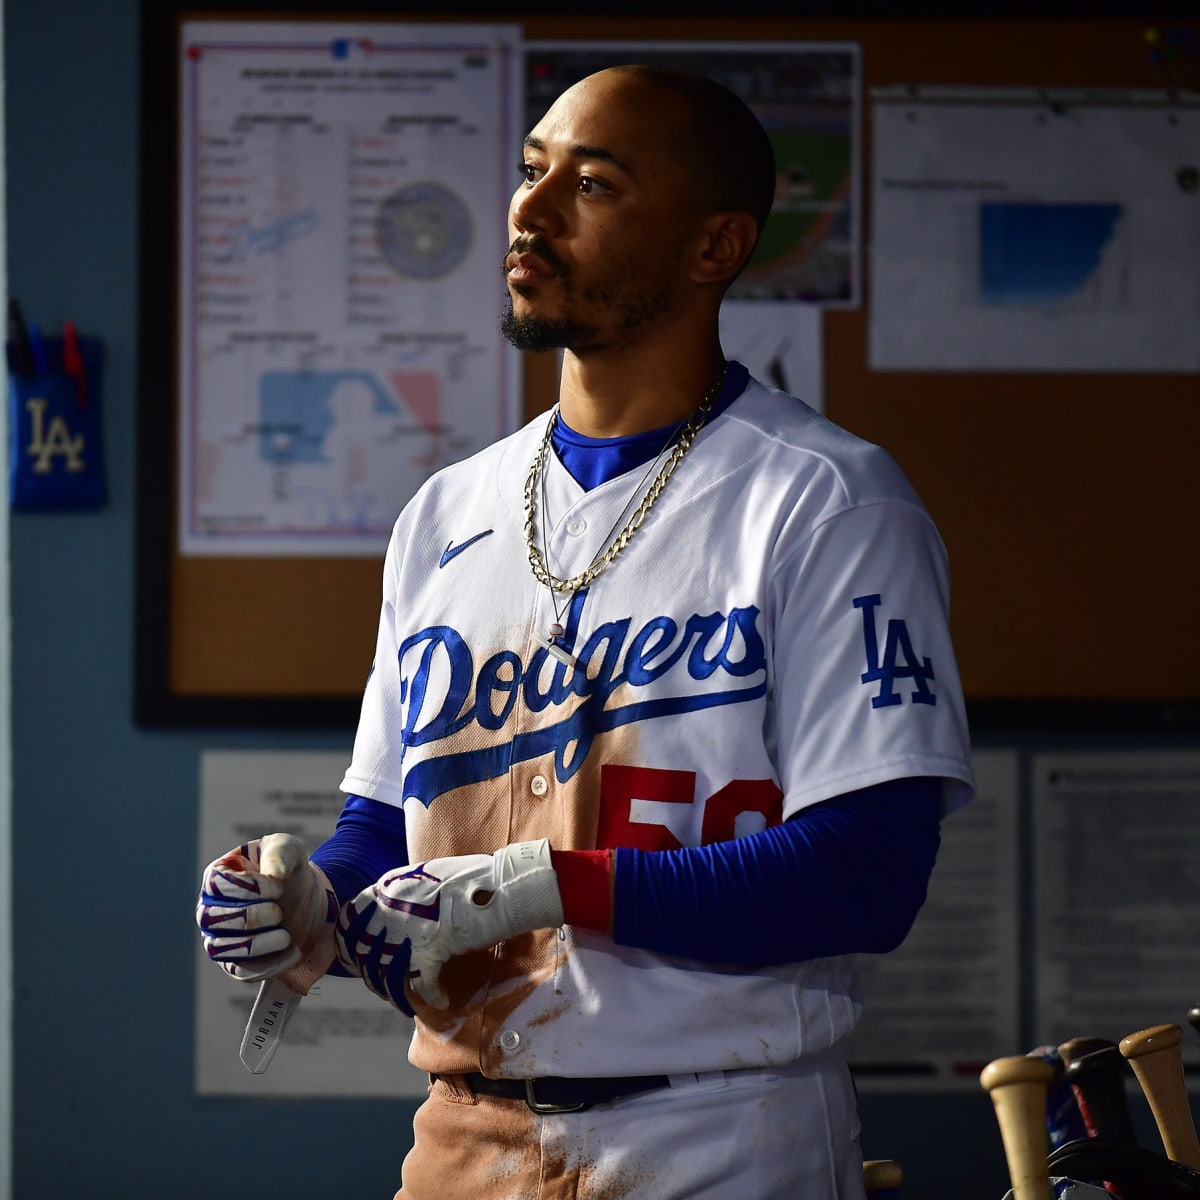 Dodgers All-Star Mookie Betts unlikely to play this weekend after